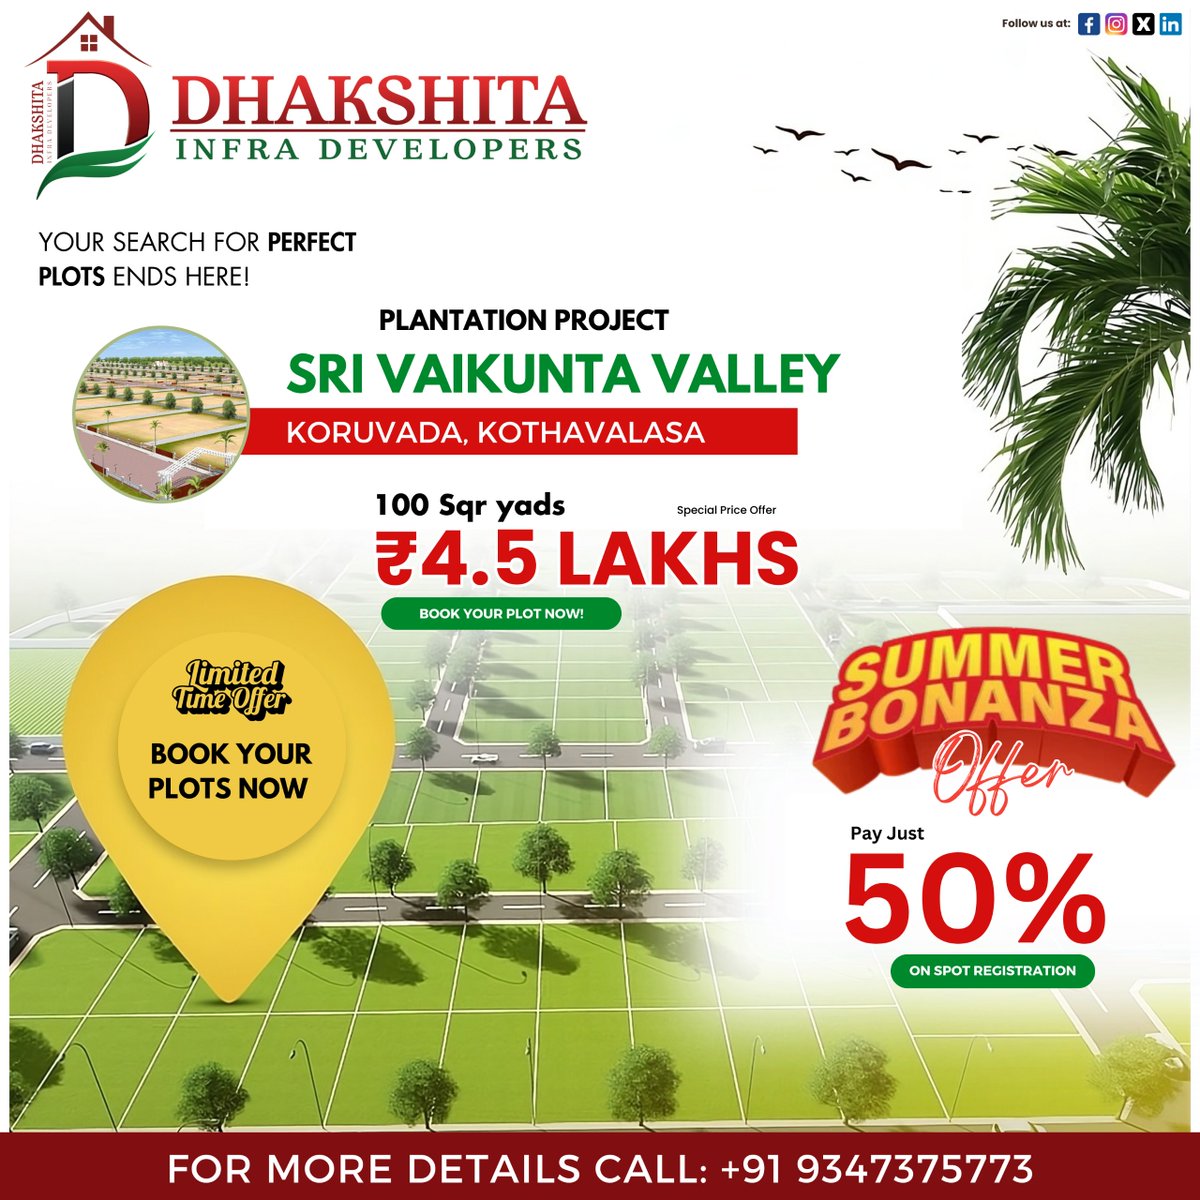 Journey where your search for perfect plots ends here with Dhakshitha Infra Developers! 🏡✨ 

More information: +91 9347375773

#DhakshitaInfra #PrimeLocation #BestRealEstateAgency #BestPlotsInVizag  #DreamHome #InvestInYourFuture  #PrimeRealEstate #LuxuryLiving #ModernHomes